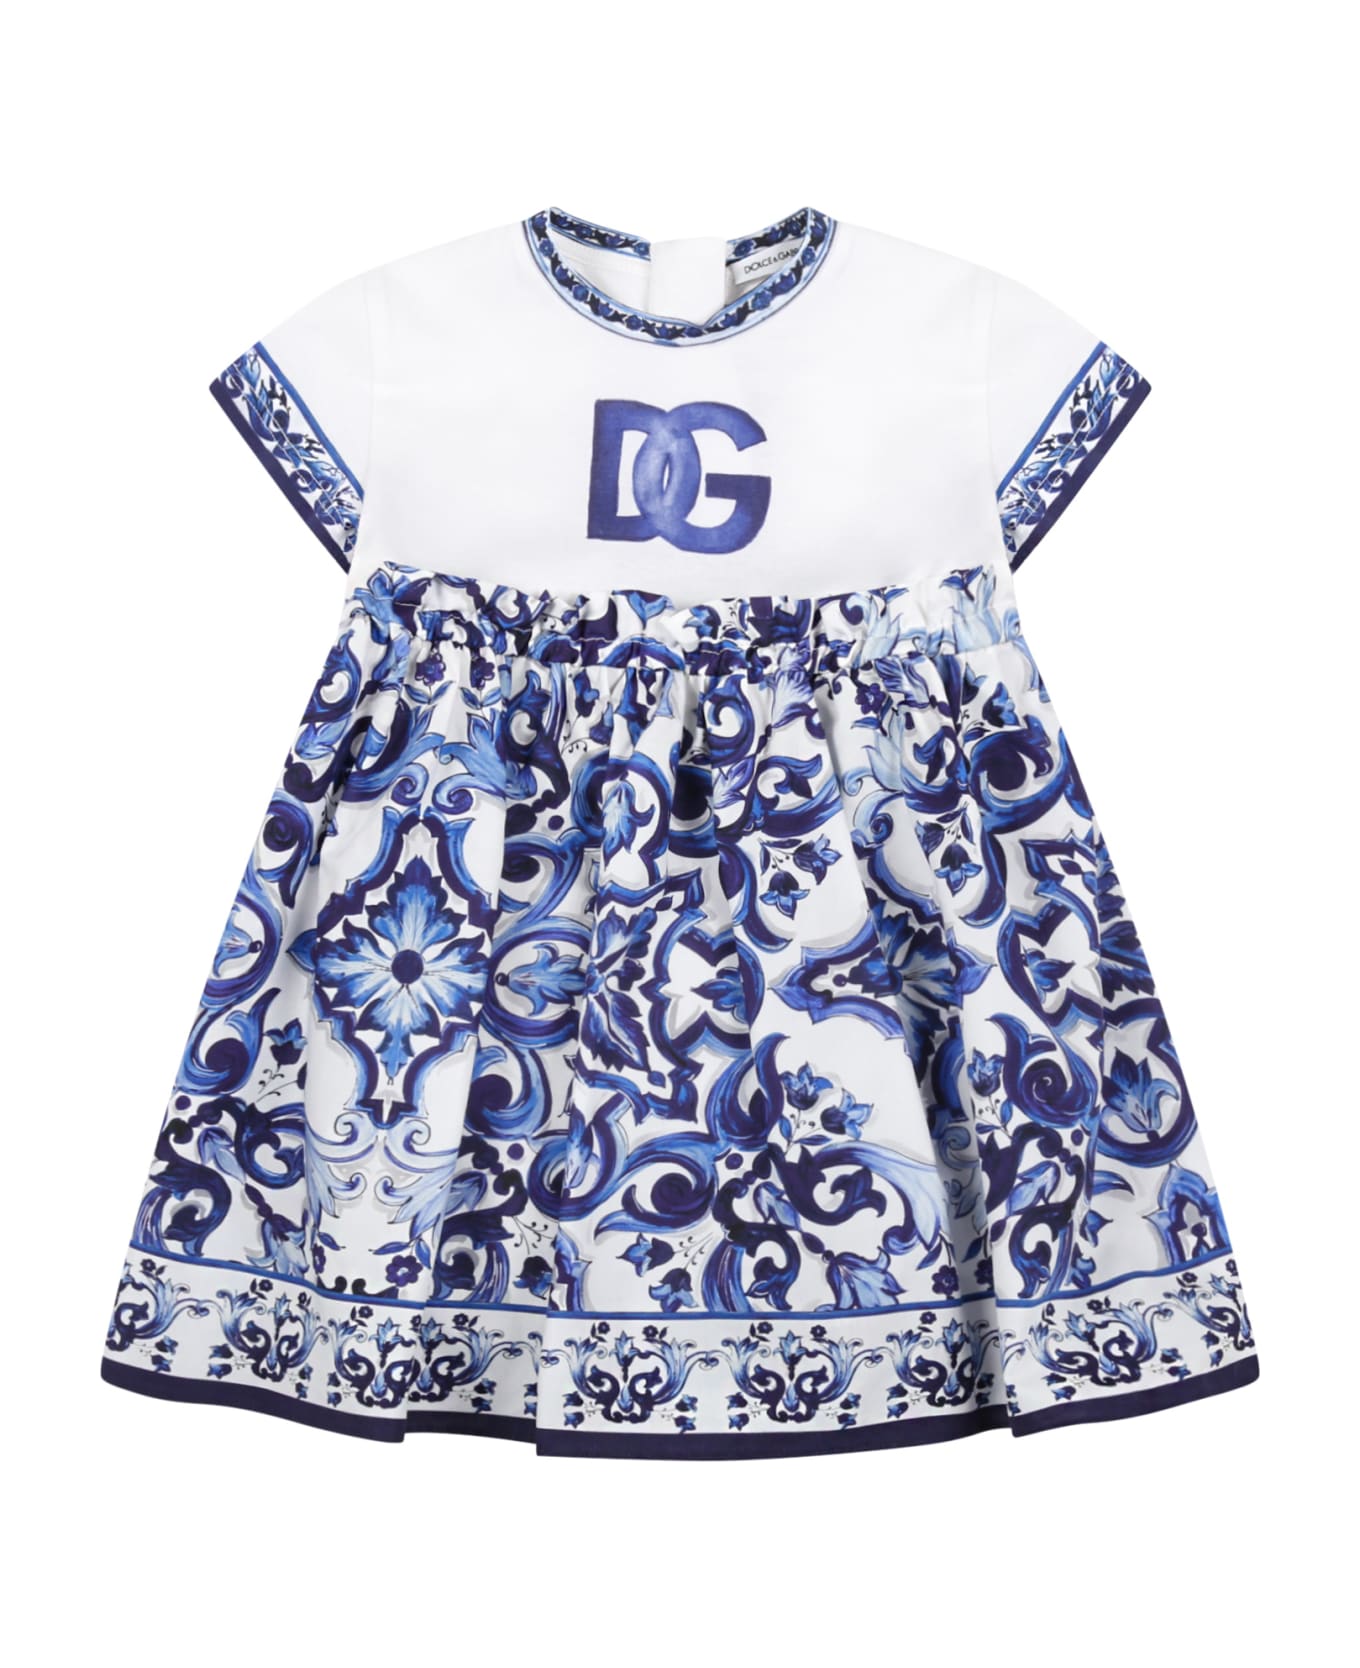 Dolce & Gabbana White Dress For Baby Girl With Logo - Multicolor